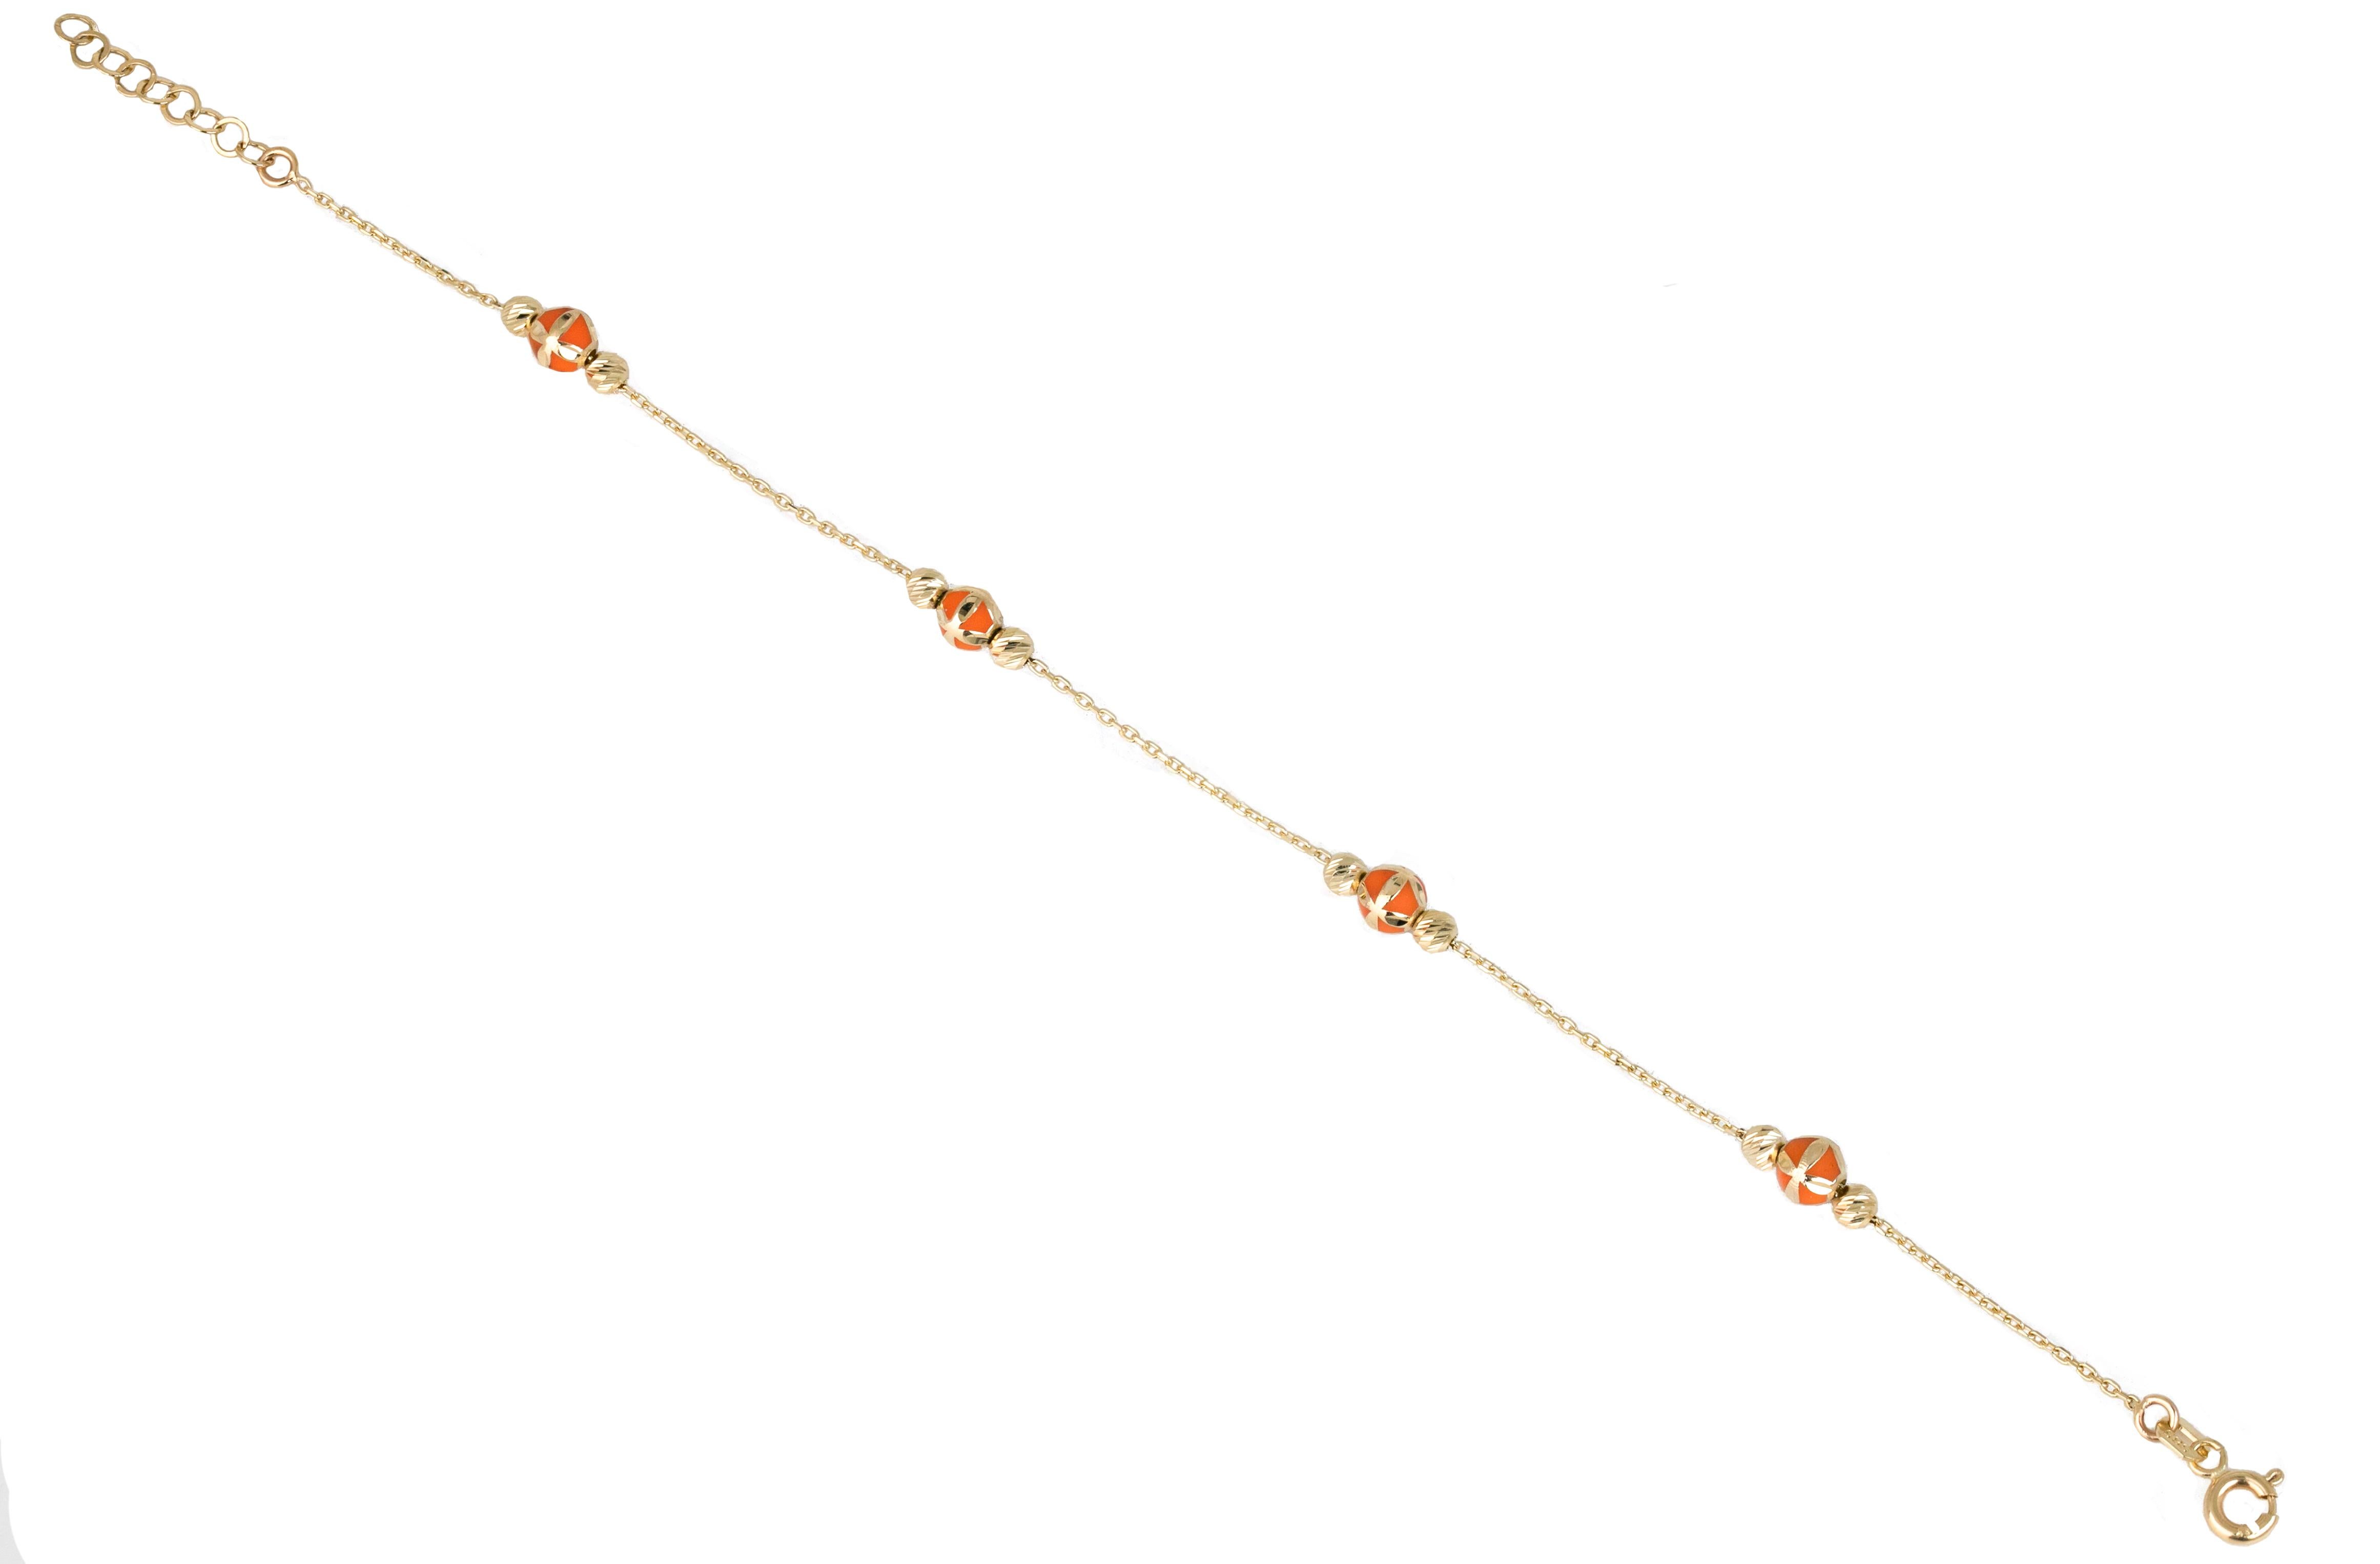 14K Gold Bracelet Orange Enameled and Dorica Collected Model Bracelet

Solid gold.
With hallmark.

Total Weight: 2,08 gr.
Size: 19.00 cm

*It is produced by placing two Dorica Balls on a forse chain and a large ball with Orange Enamel and a pattern